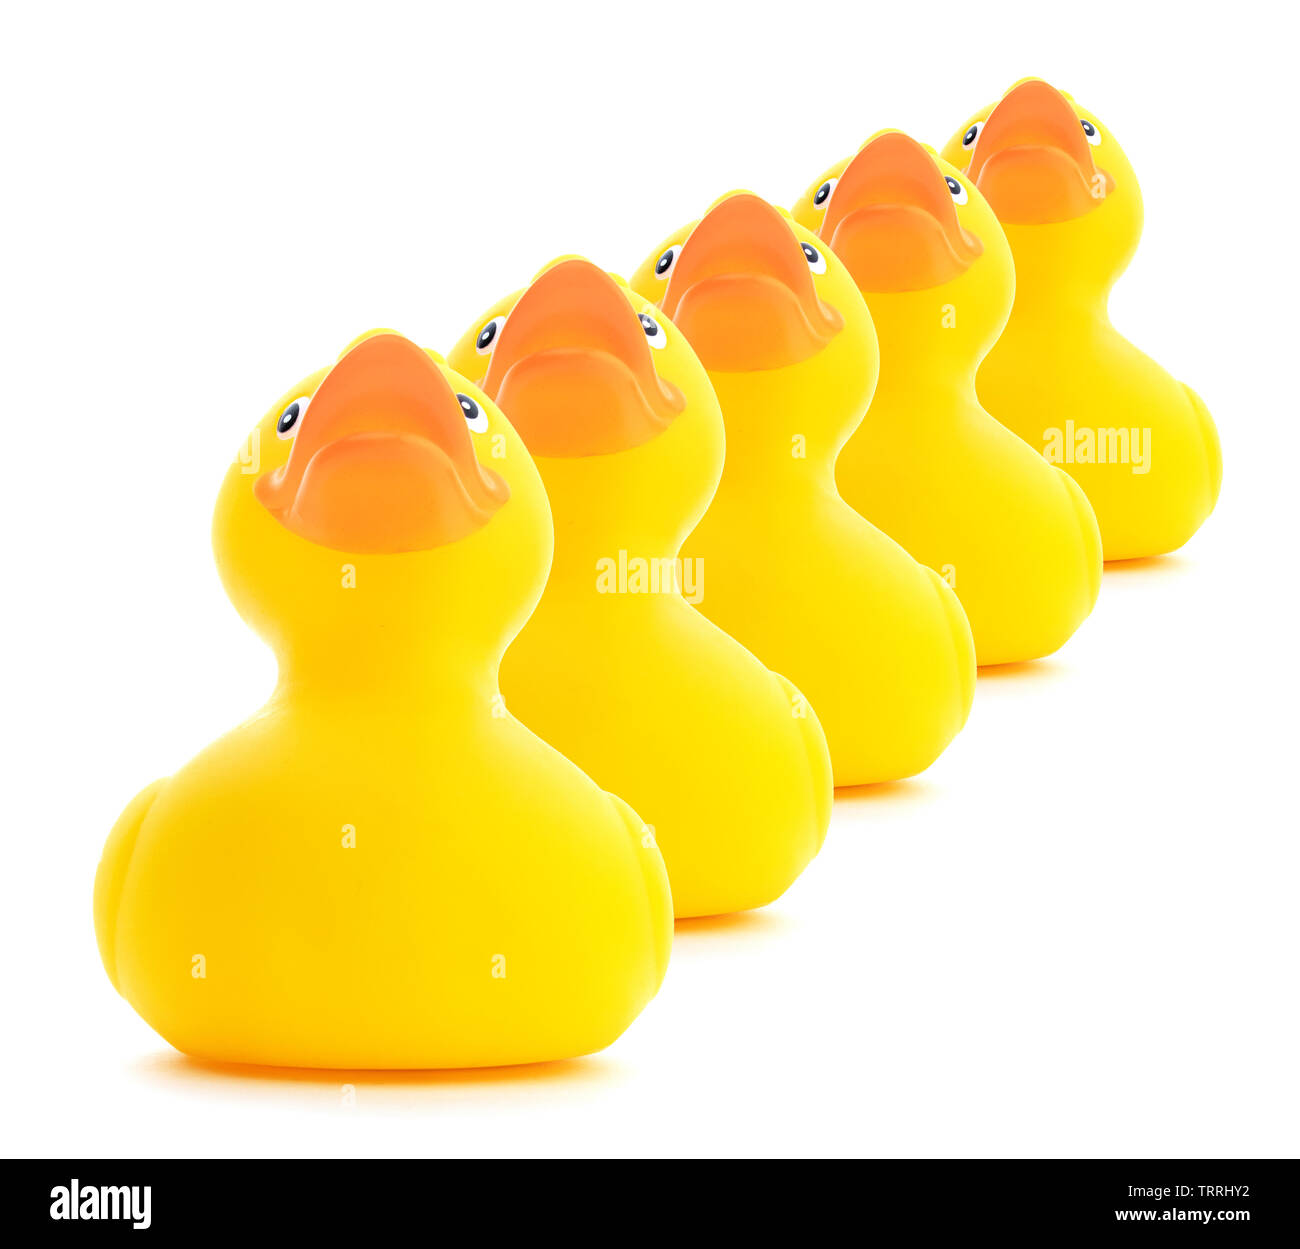 Get your ducks in a row. Rubber ducks in a row isolated on a white background. Stock Photo